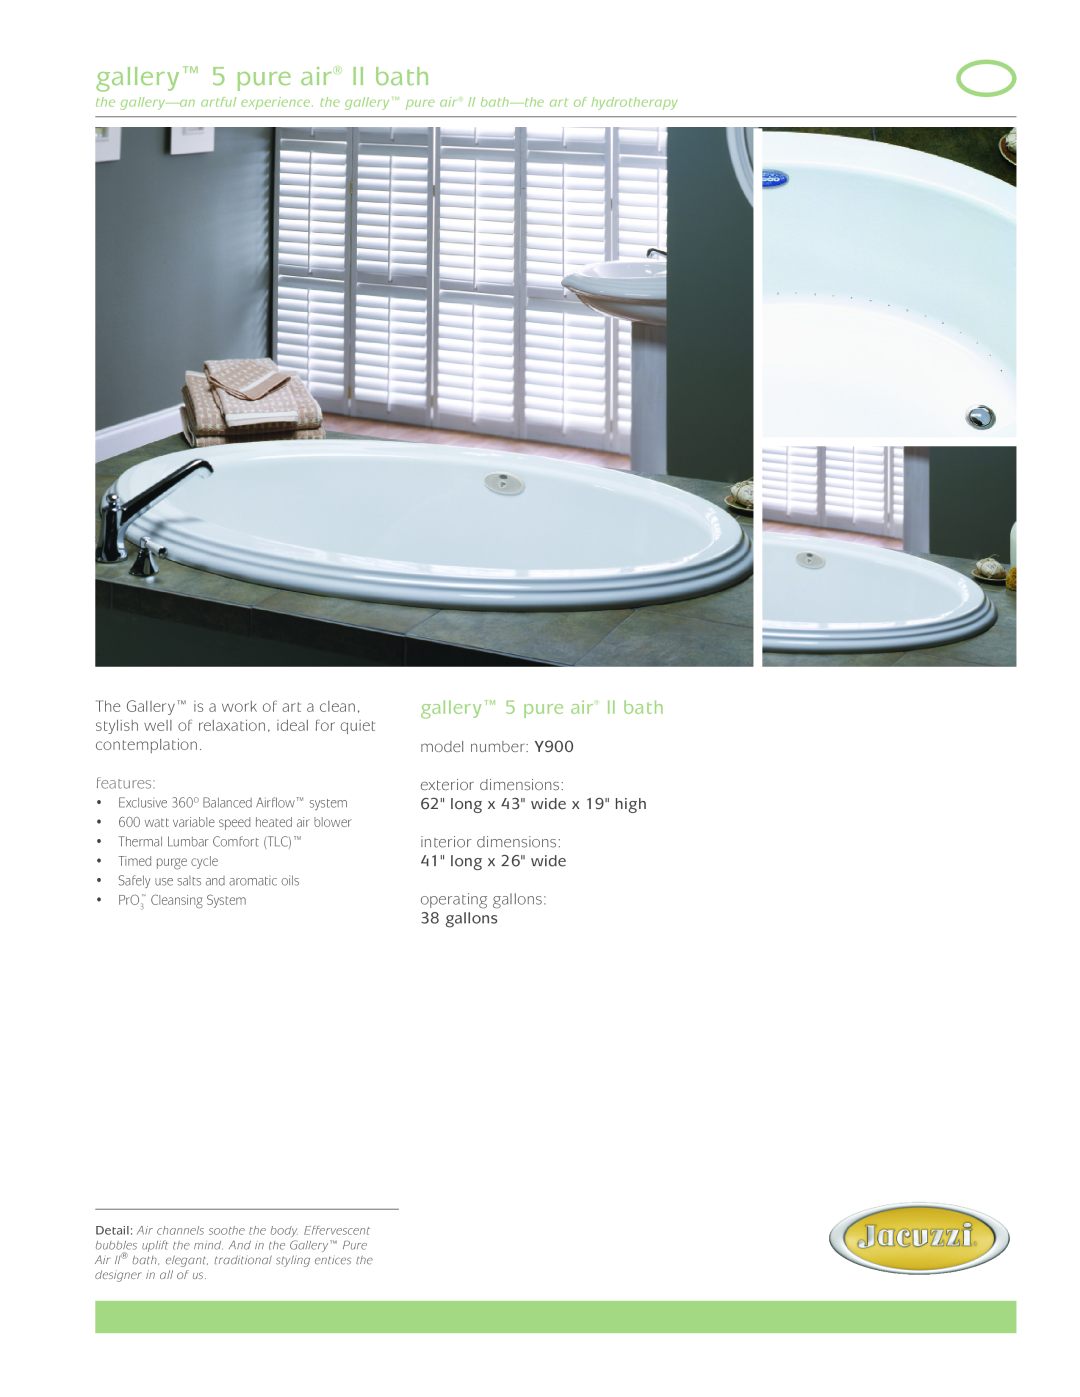 Jacuzzi Y900 dimensions gallery 5 pure air ll bath, features 